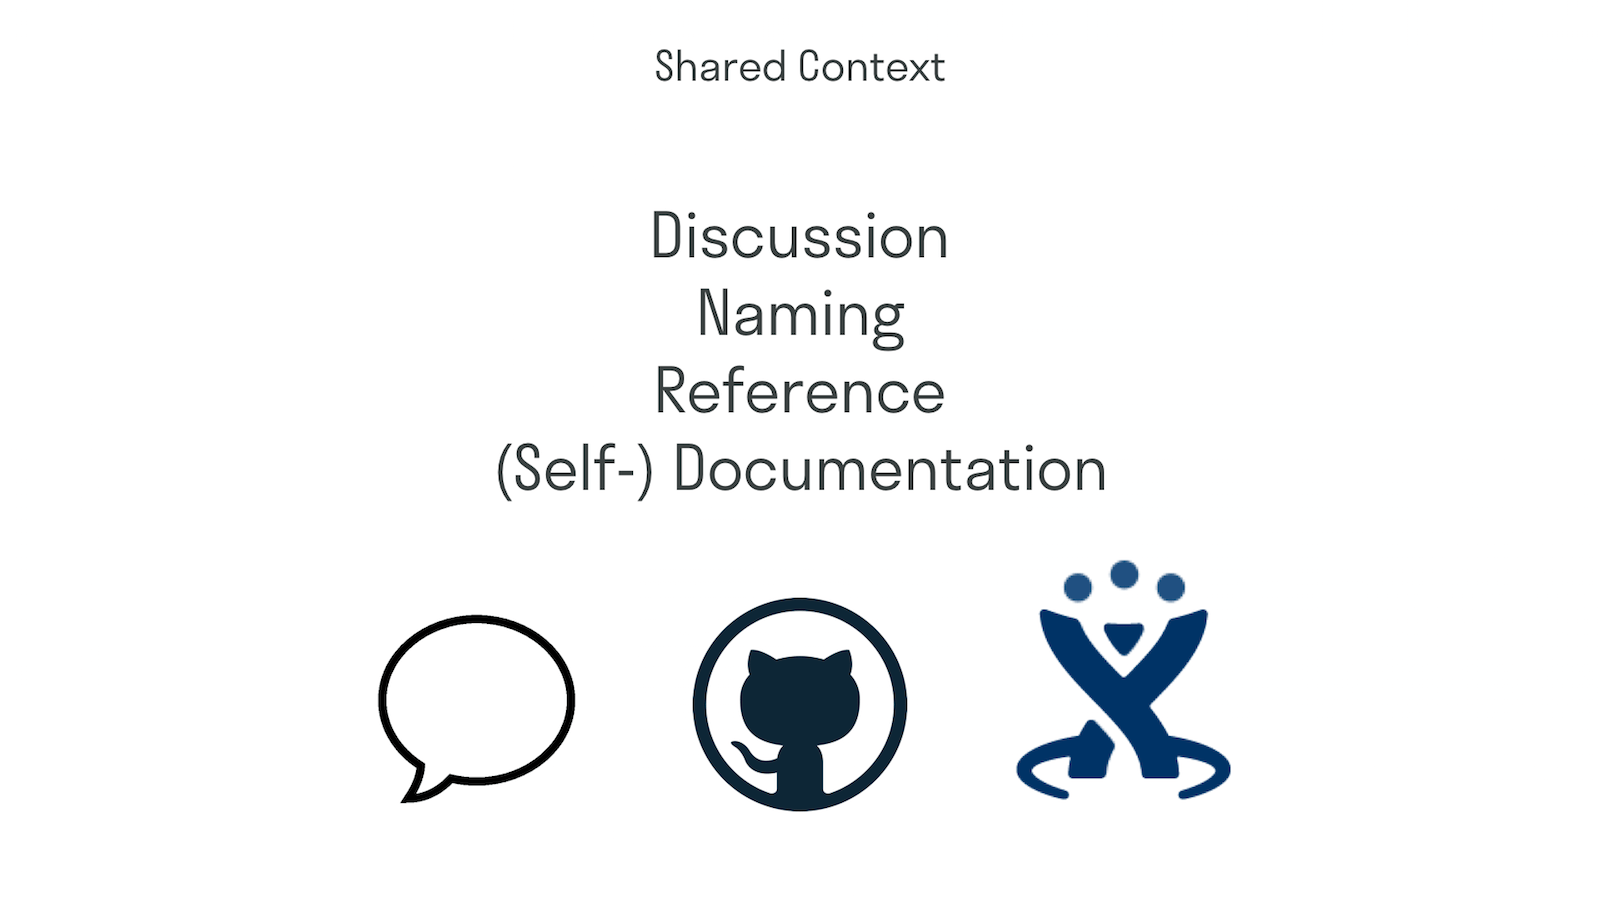 Discussion, naming things, reference materials and self-documentation all help.